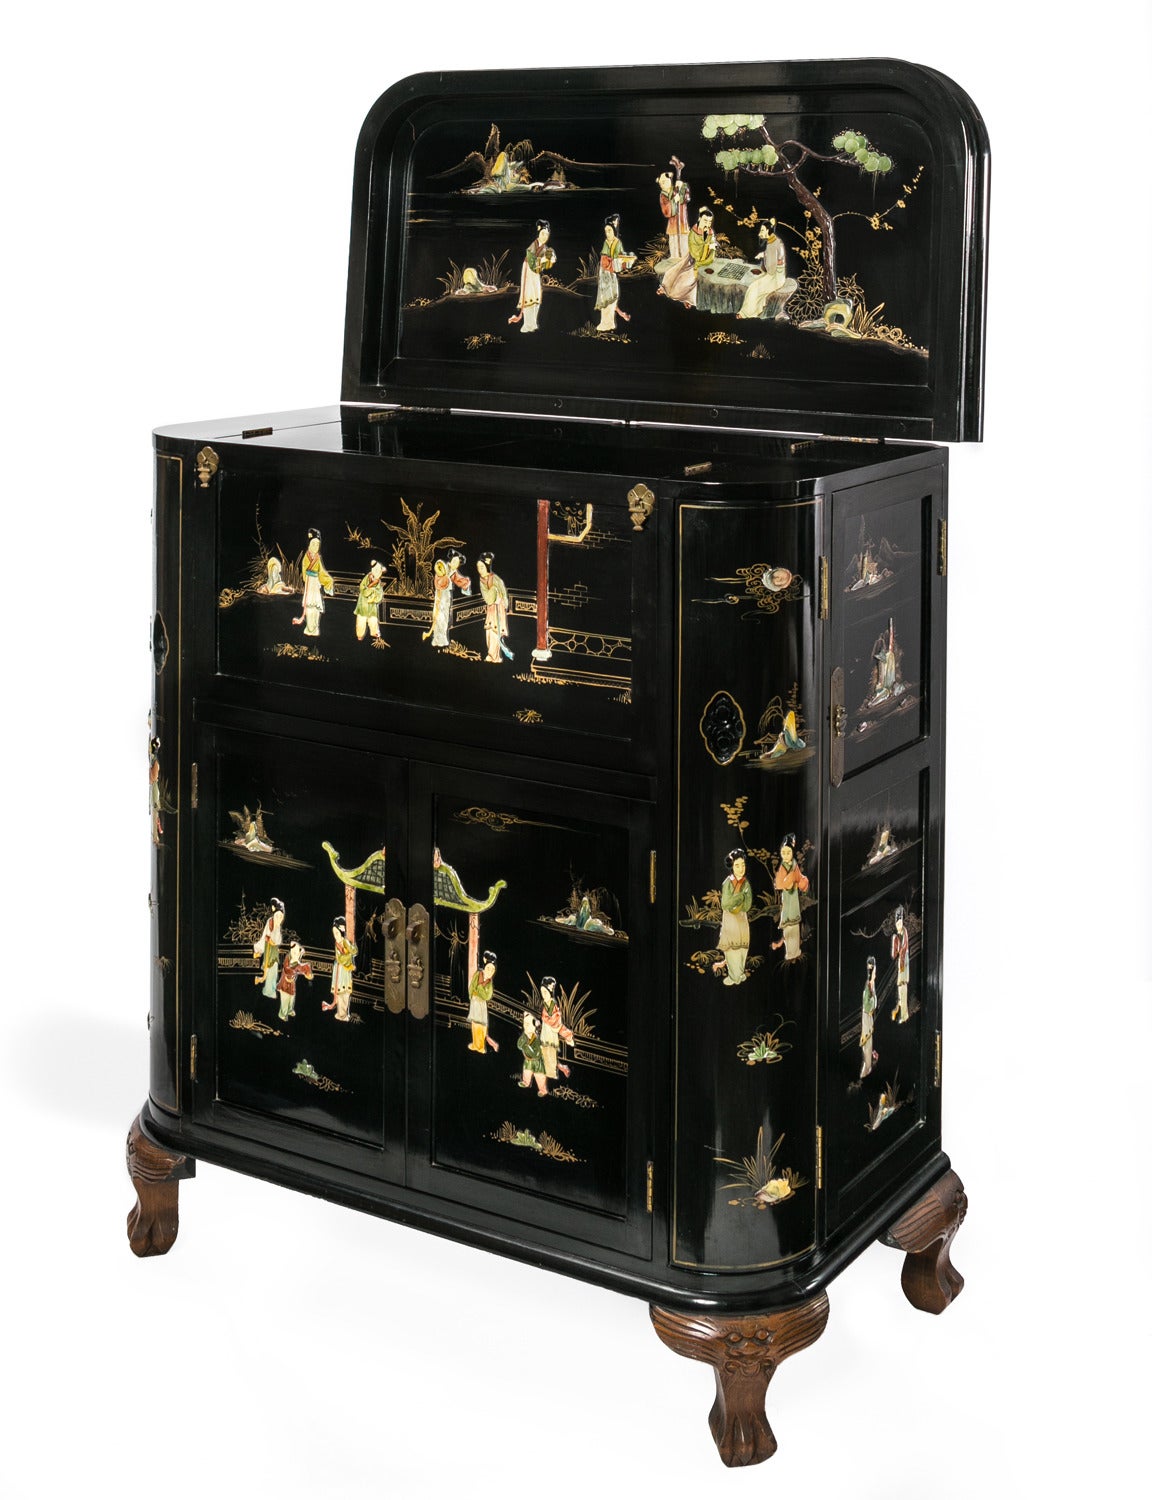 Regency black lacquer chinoiserie claw foot drinking cabinet unfolds with multiple compartments. Closed dimensions are: Height: 42